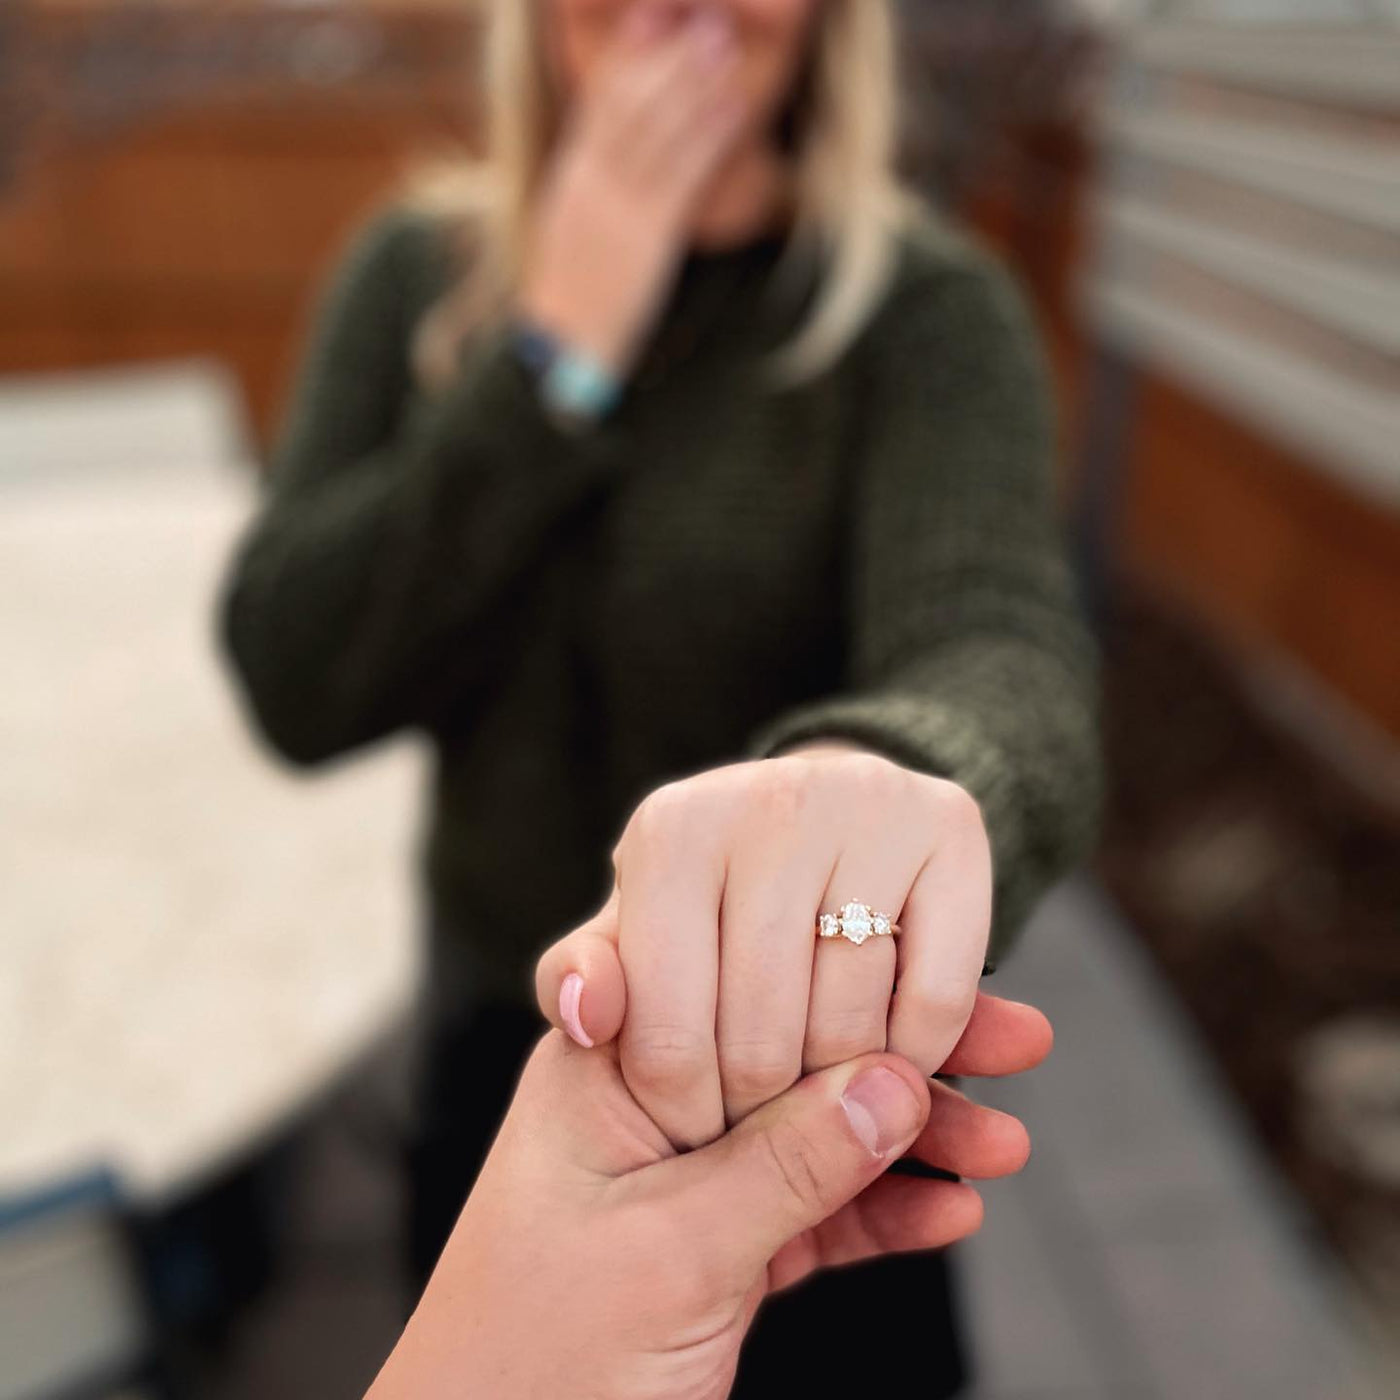 Should I Let My Girlfriend Pick Her Engagement Ring?